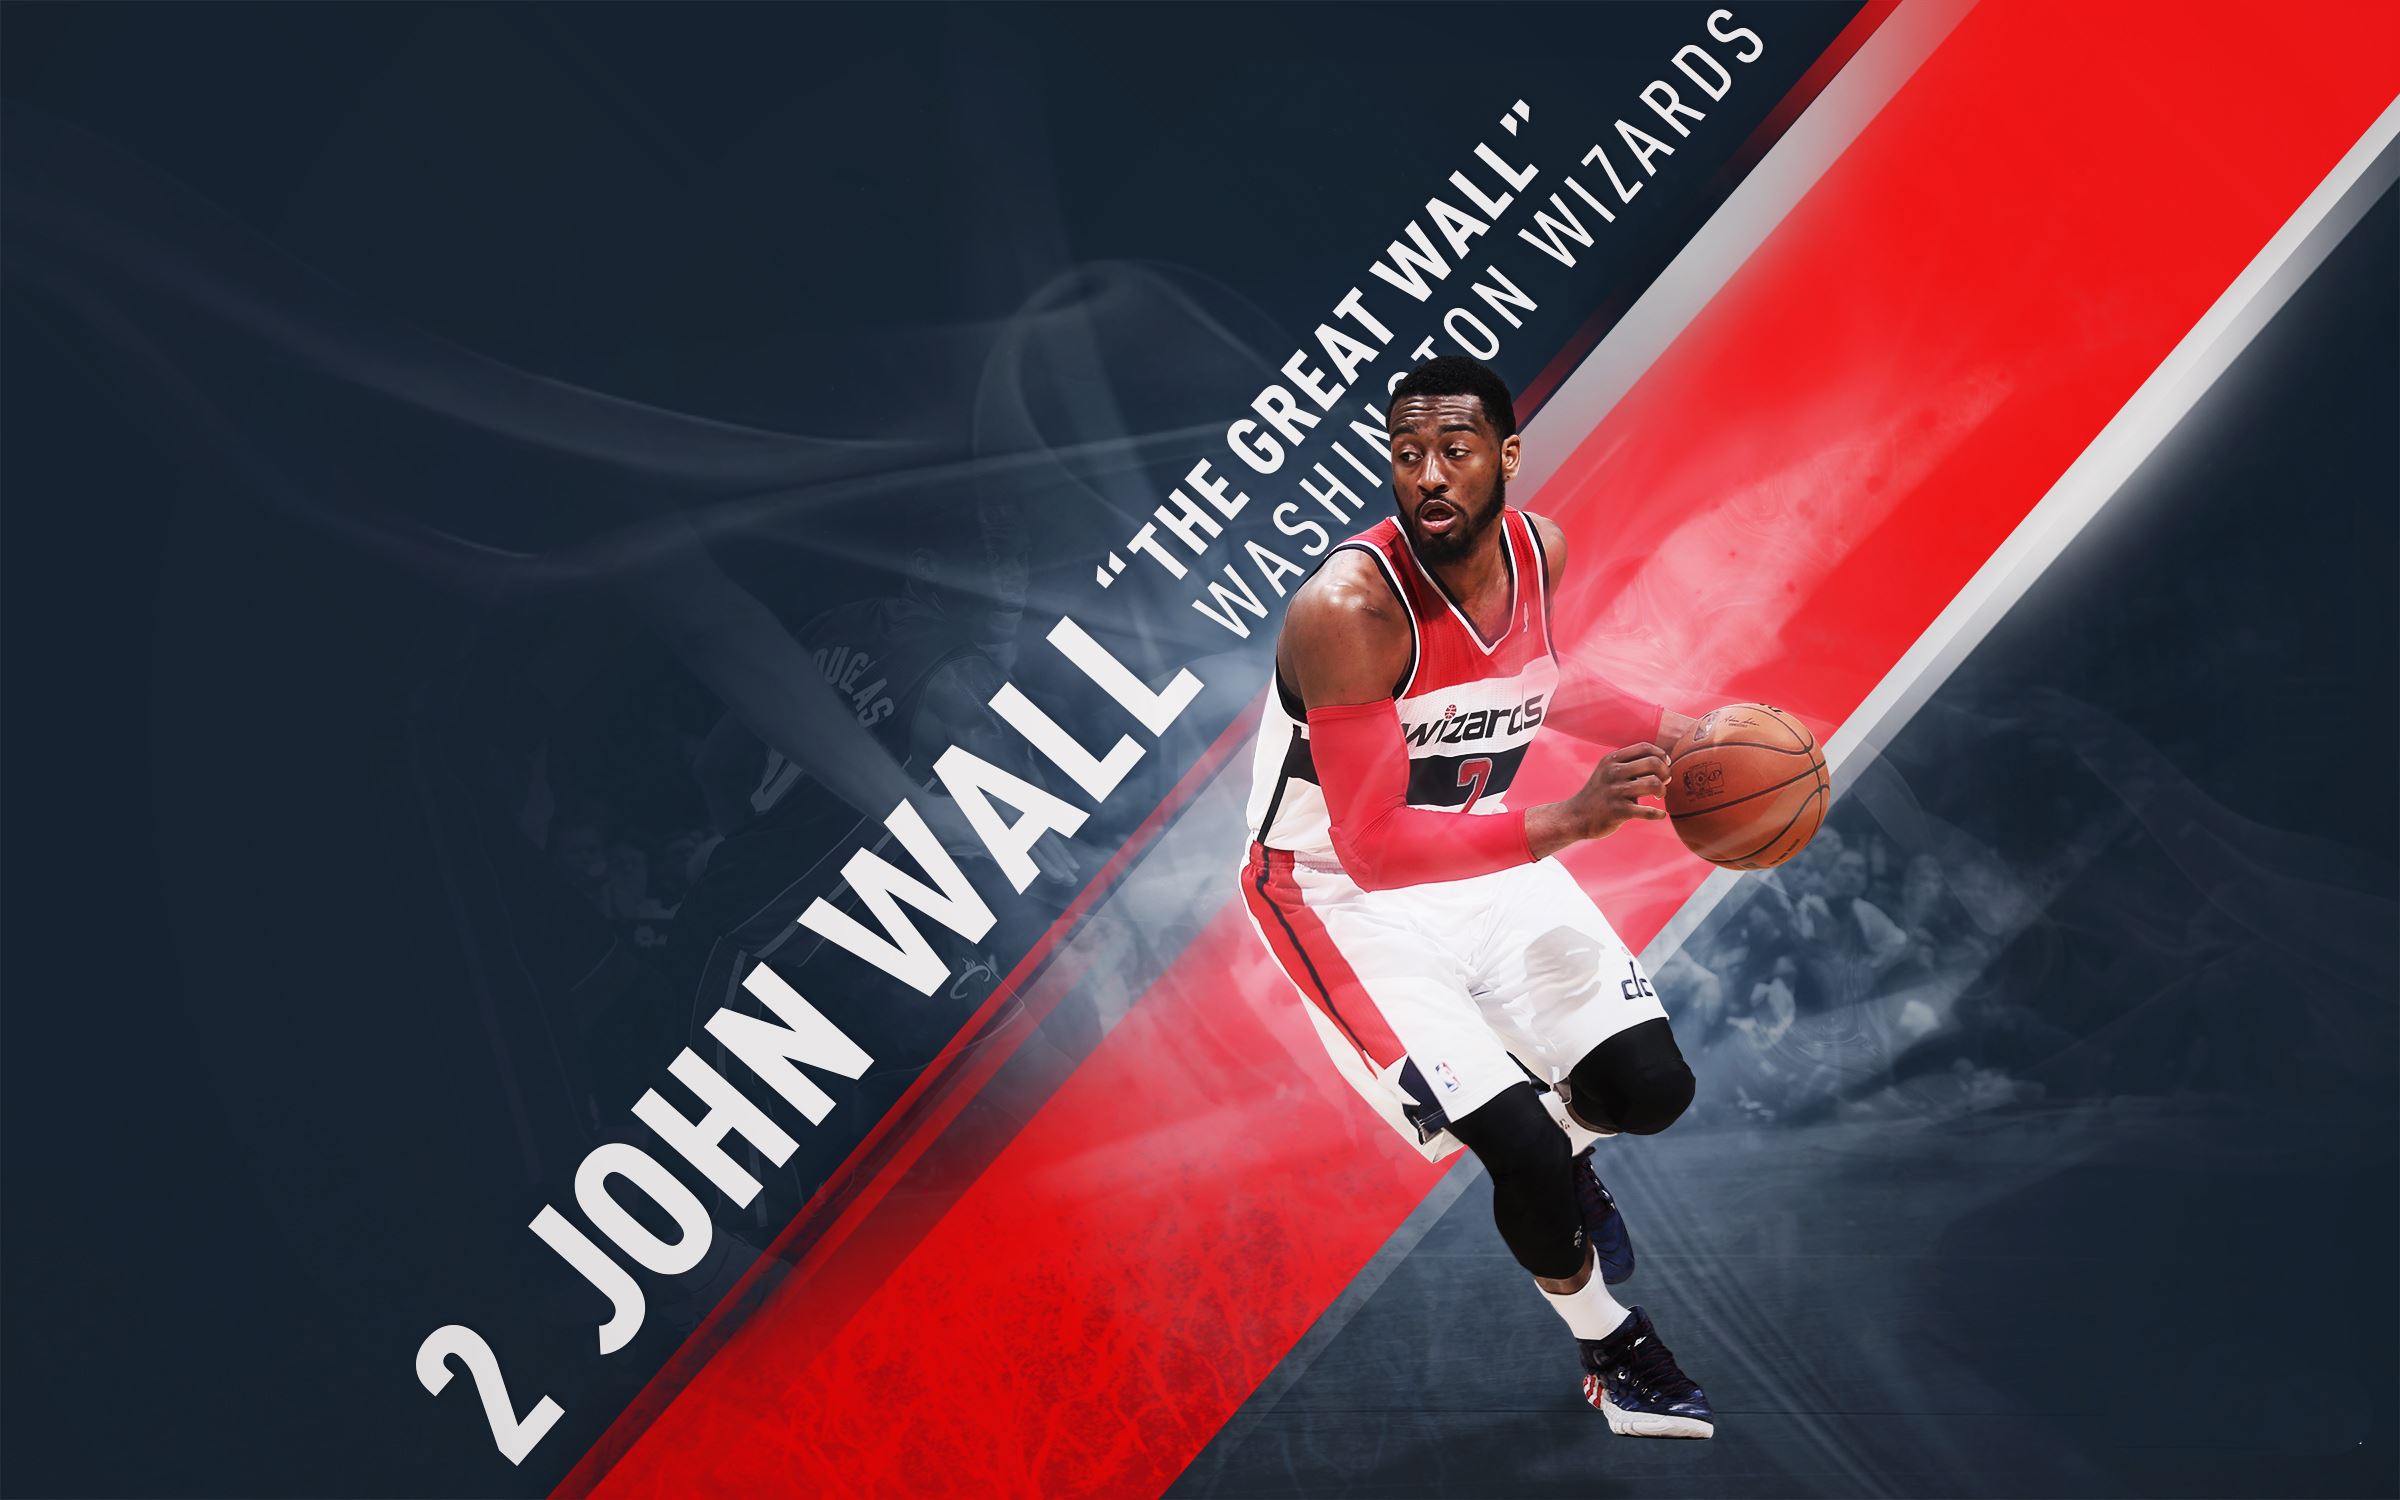 john wall wallpaper hd,sports,competition event,advertising,games